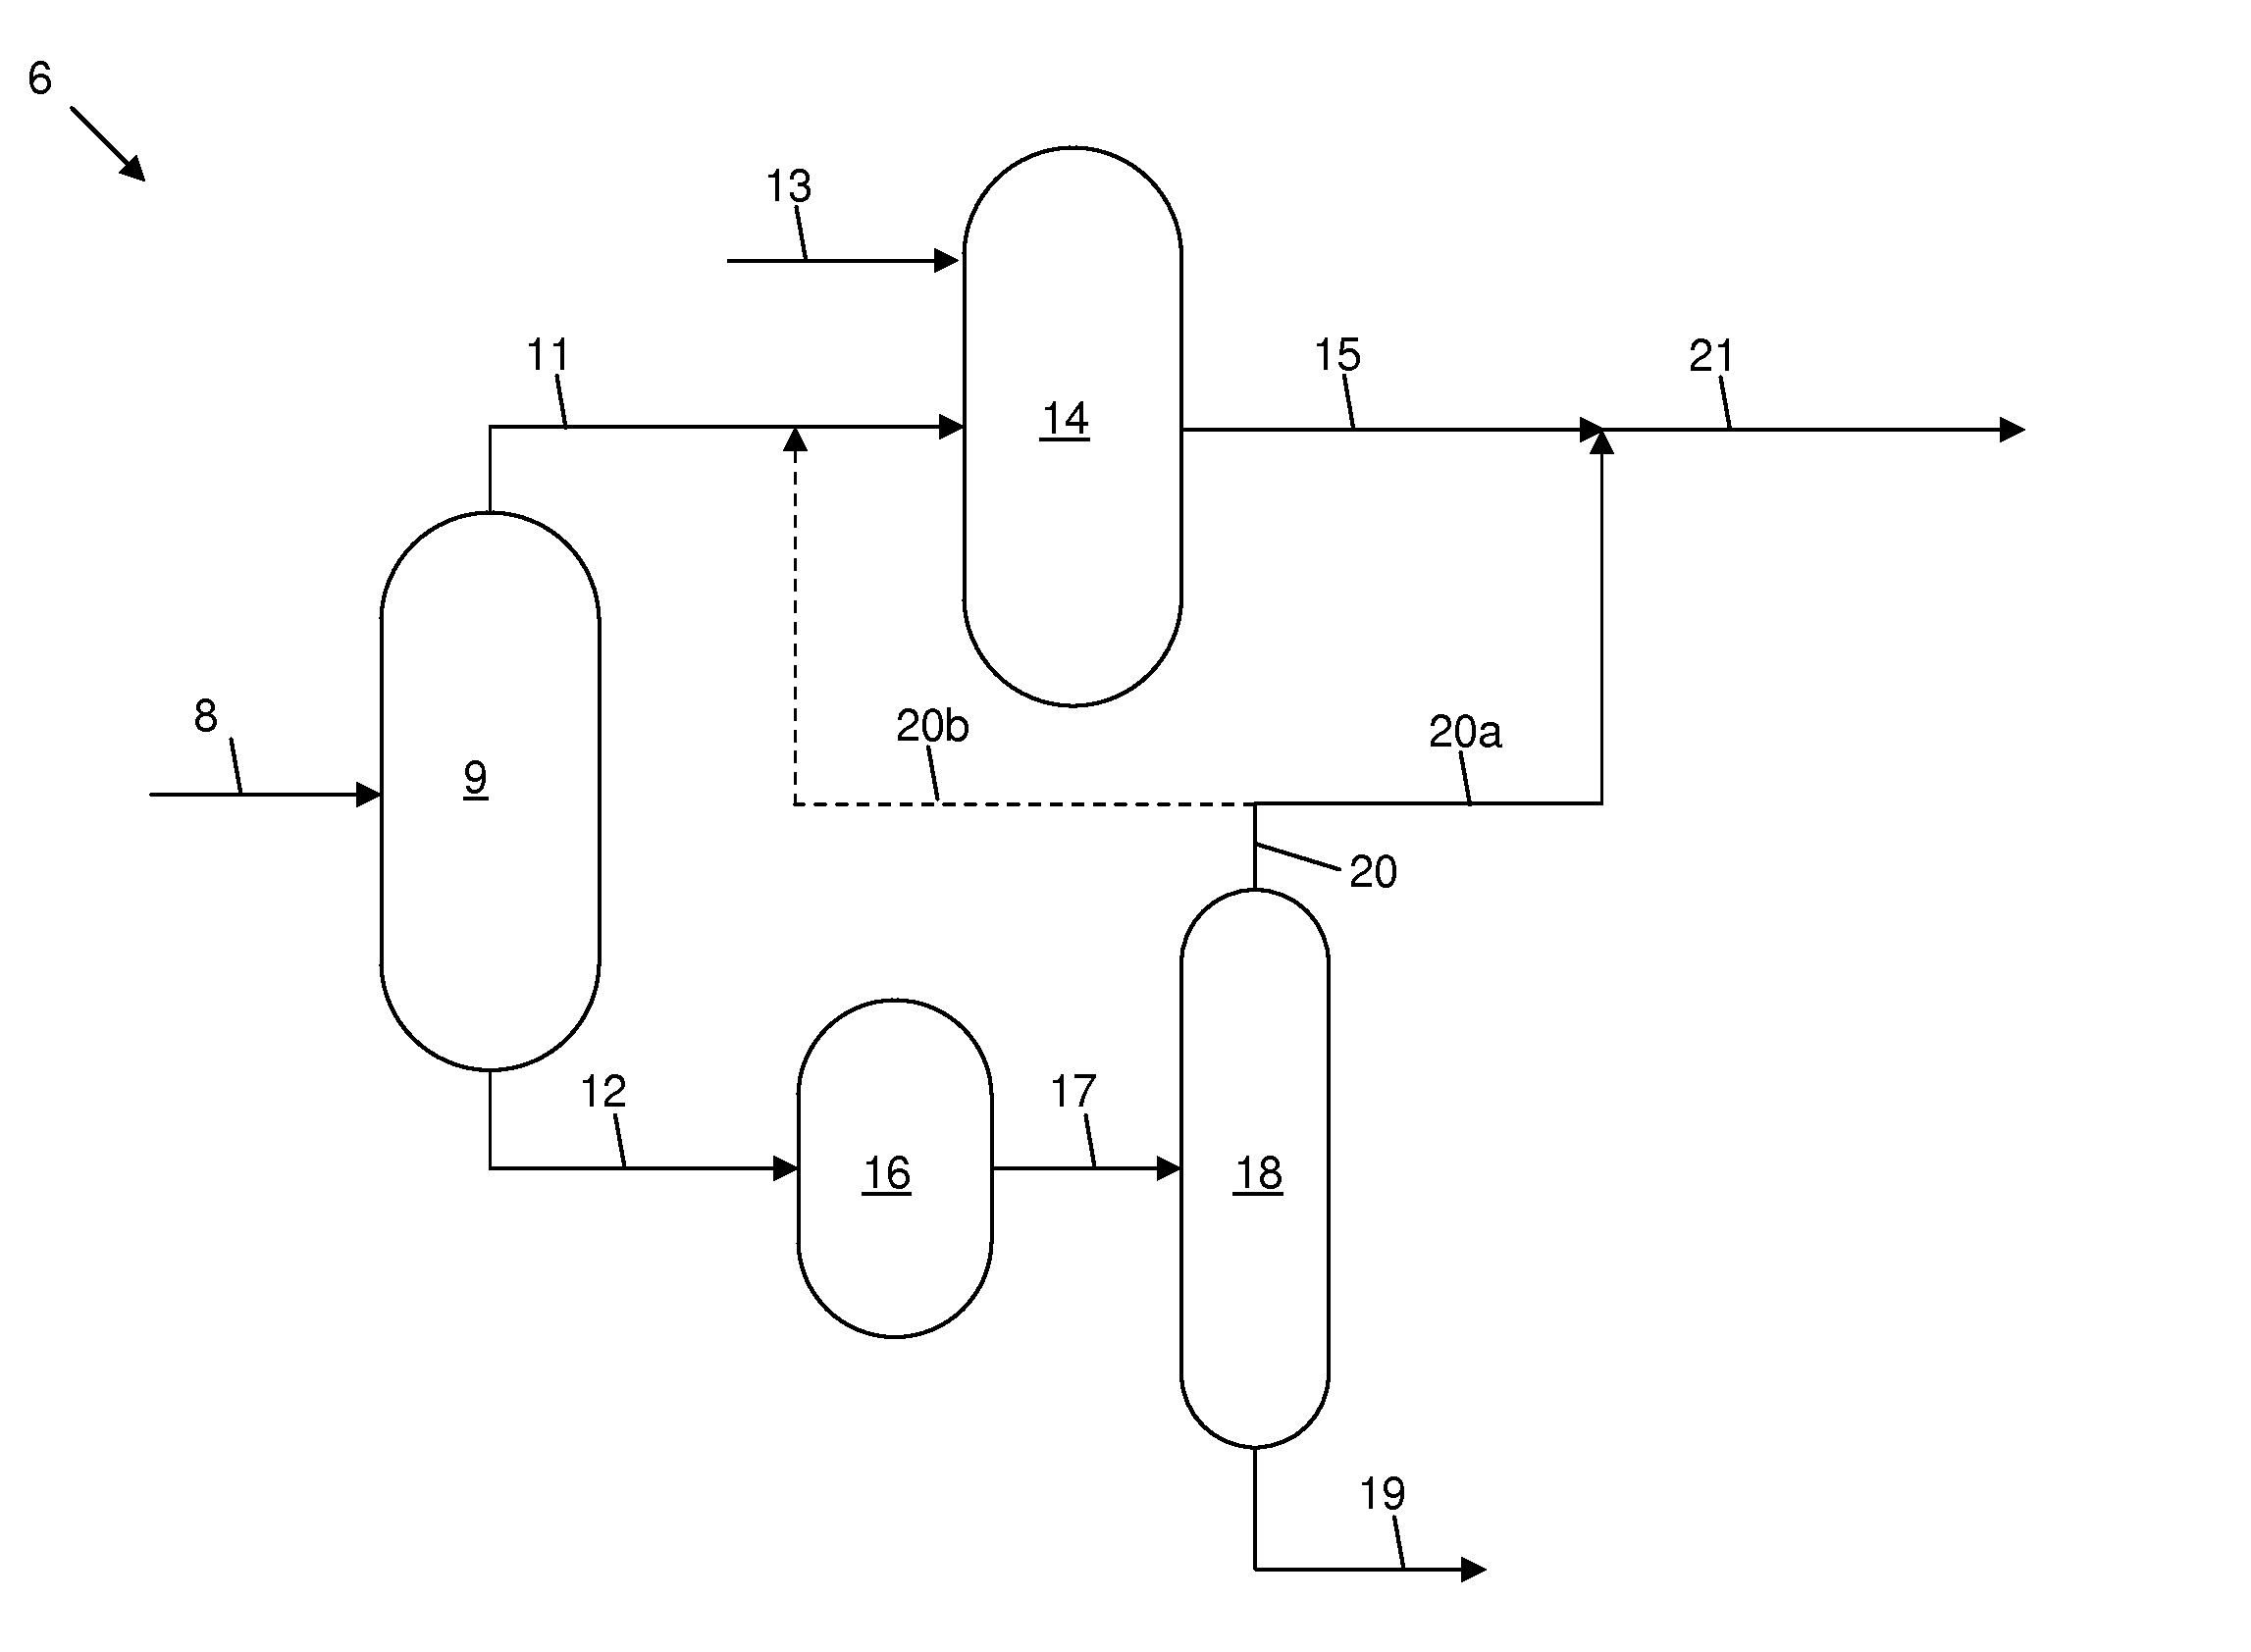 Targeted desulfurization process and apparatus integrating oxidative desulfurization and hydrodesulfurization to produce diesel fuel having an ultra-low level of organosulfur compounds